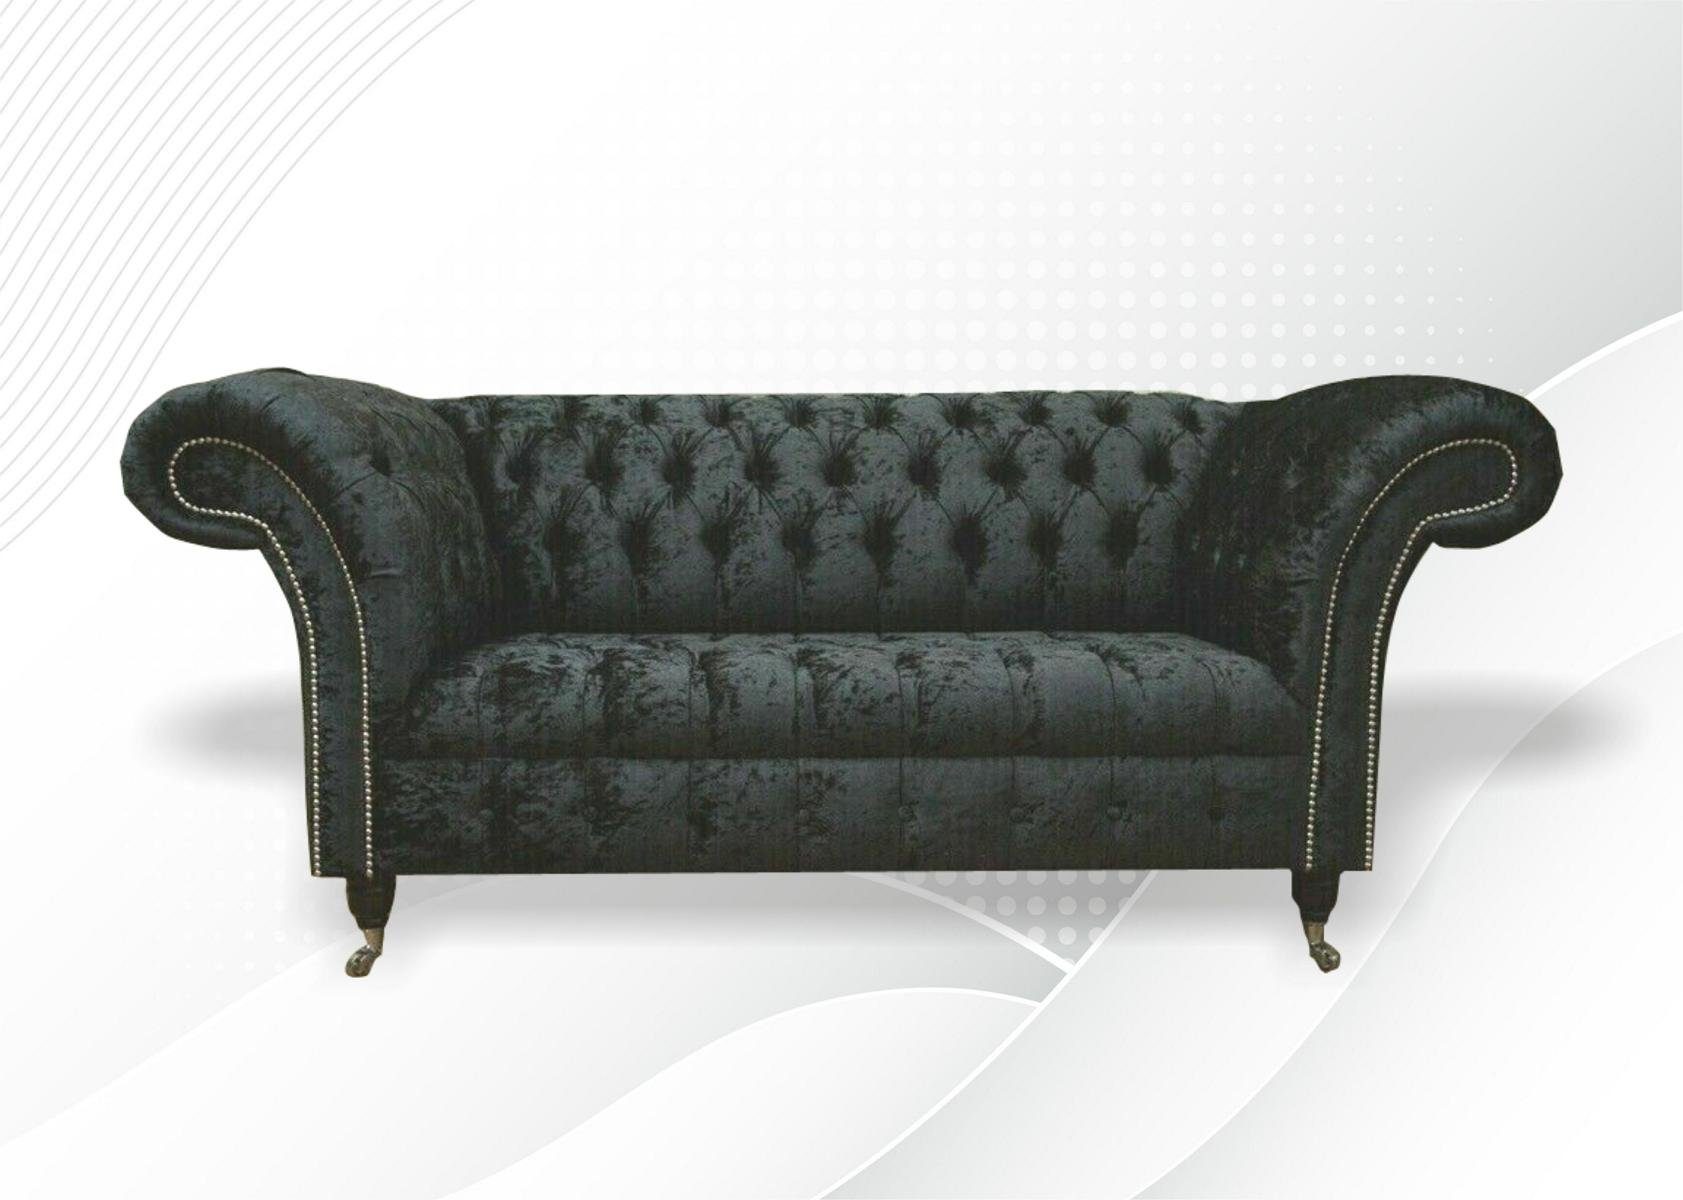 JVmoebel Chesterfield-Sofa, Chesterfield Samt Club Couch Polster 2 Sitzer design Textil Sofa